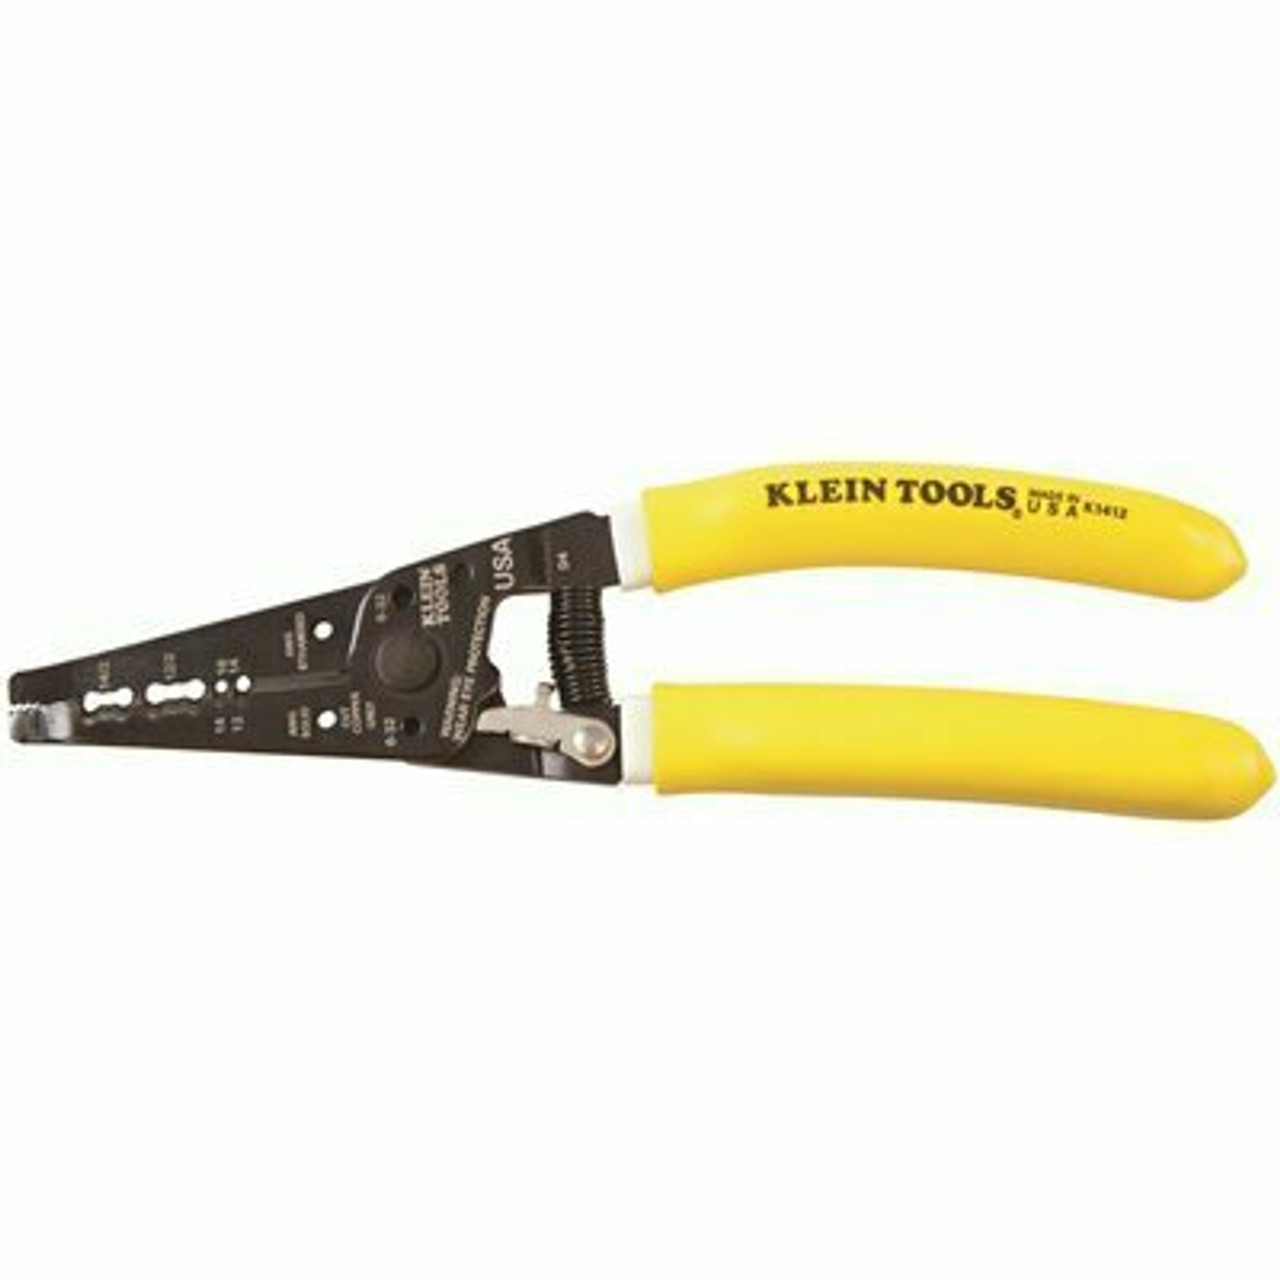 Klein Tools 7-3/4 In. Klein-Kurve Dual Non-Metallic Cable Stripper And Cutter